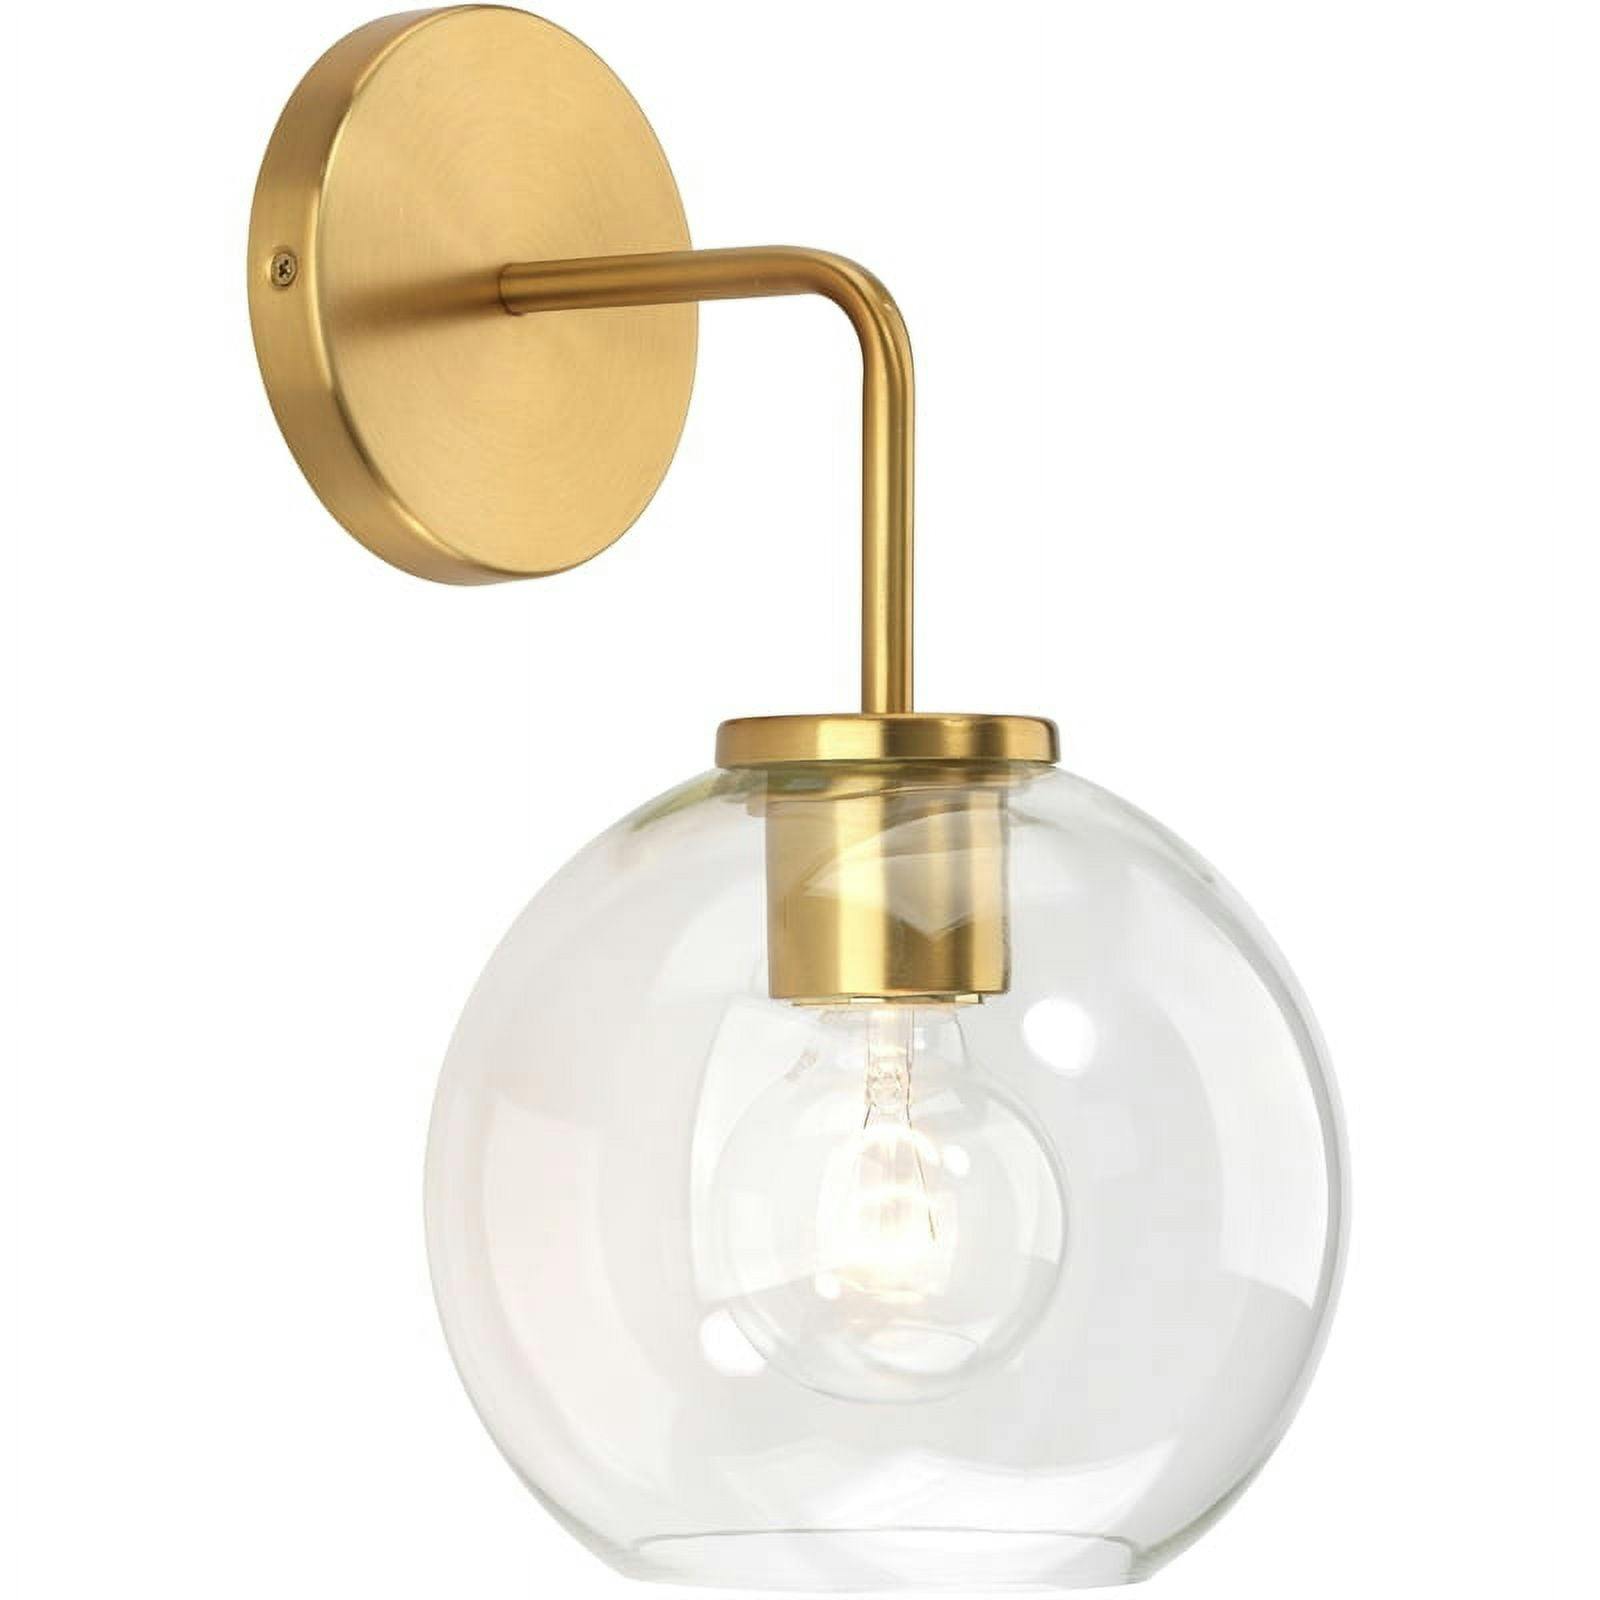 Reece Antique Brass Direct Wired 1-Light Wall Sconce